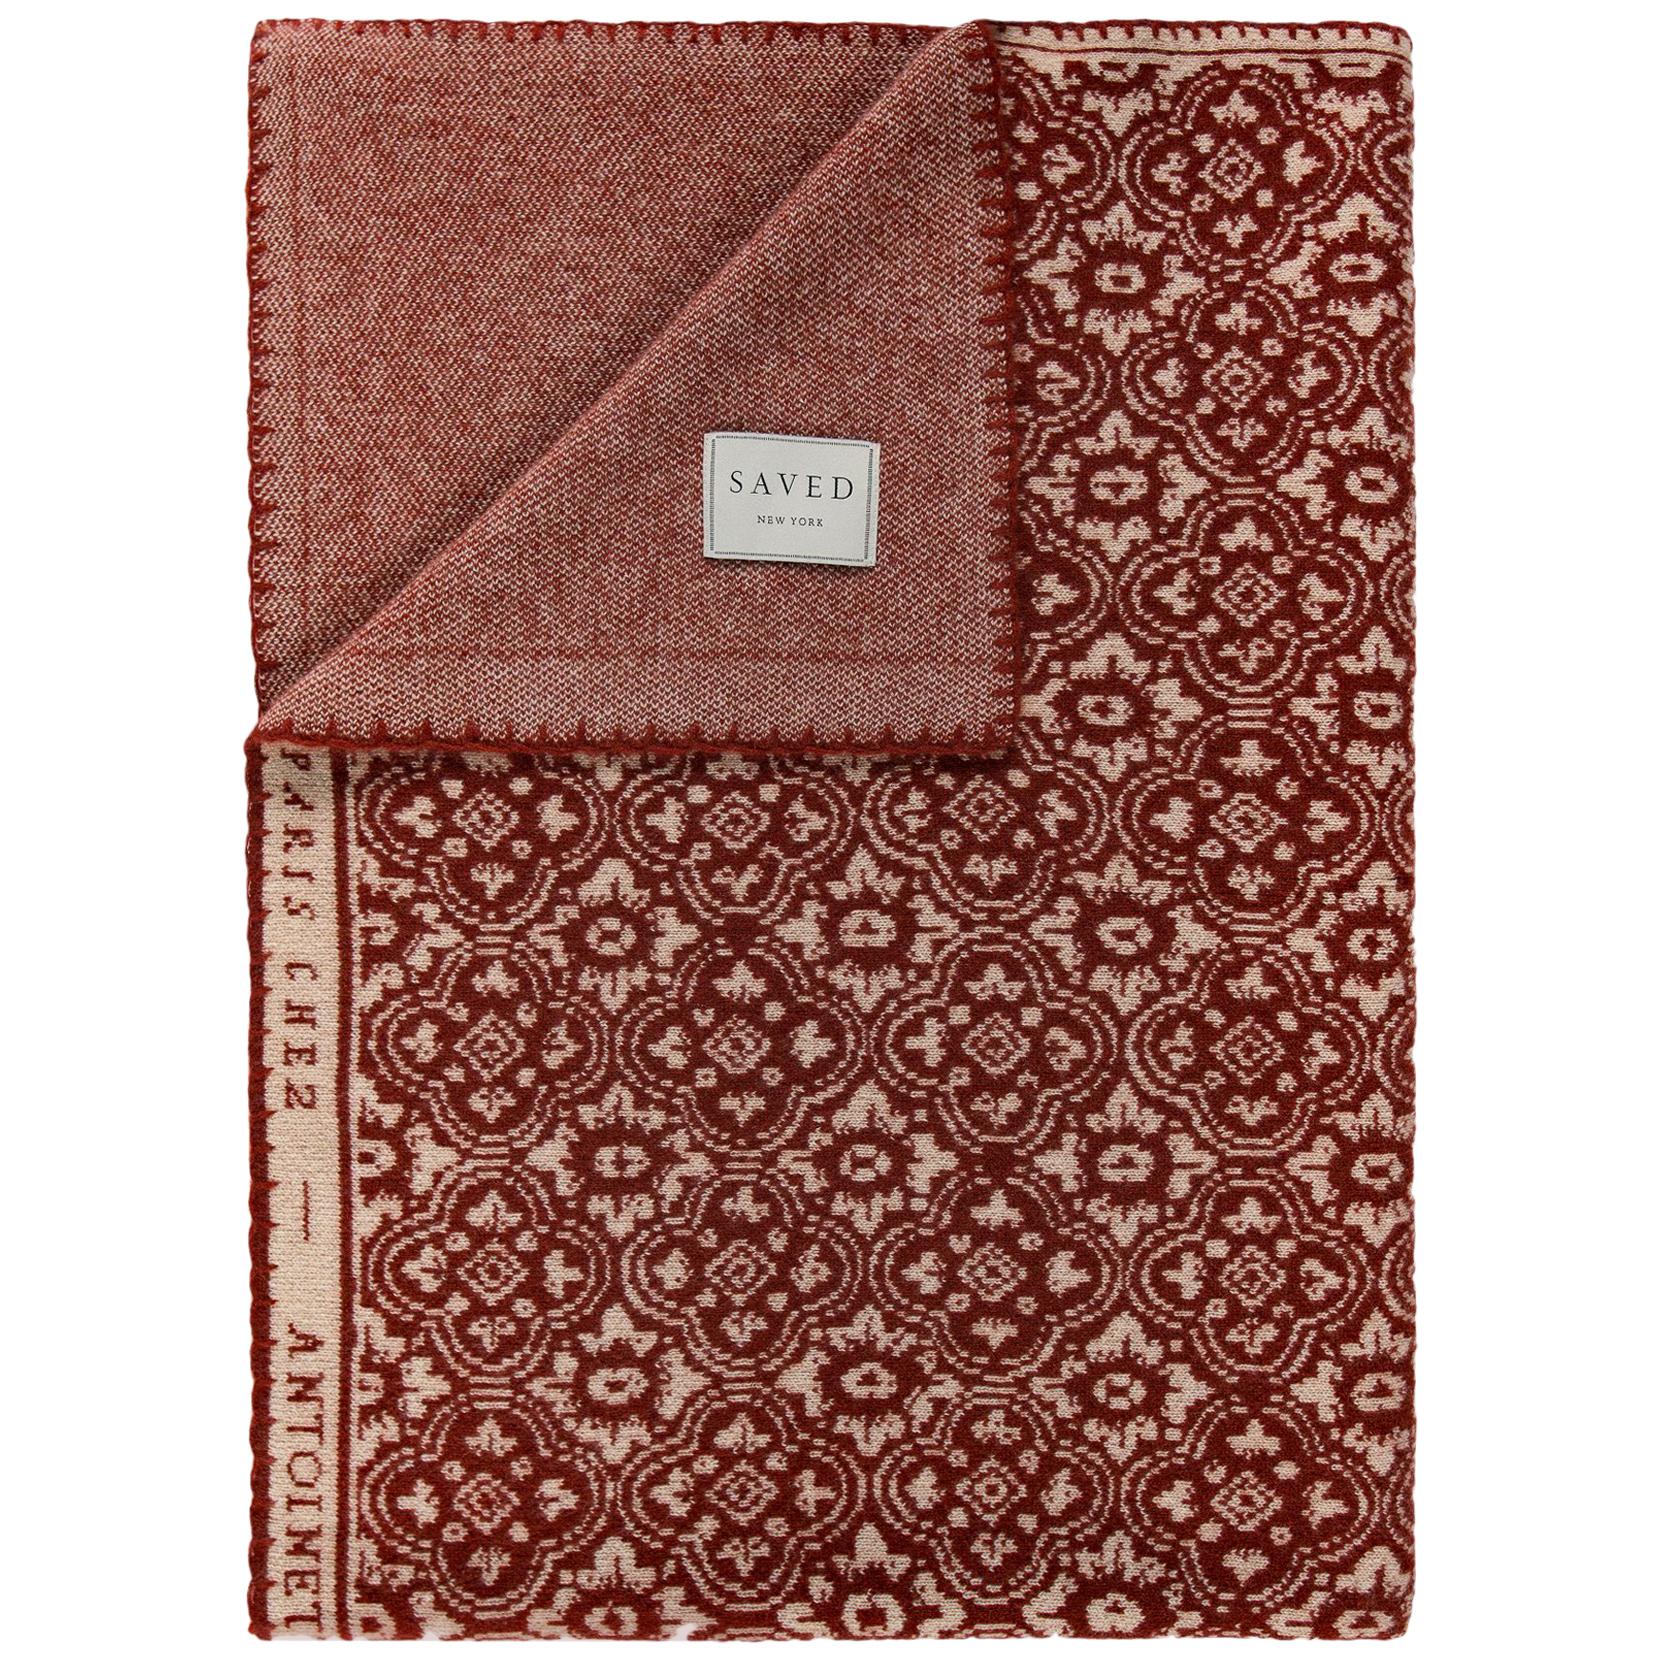 Renaissance N. 25 Rouge Throw by Saved, New York